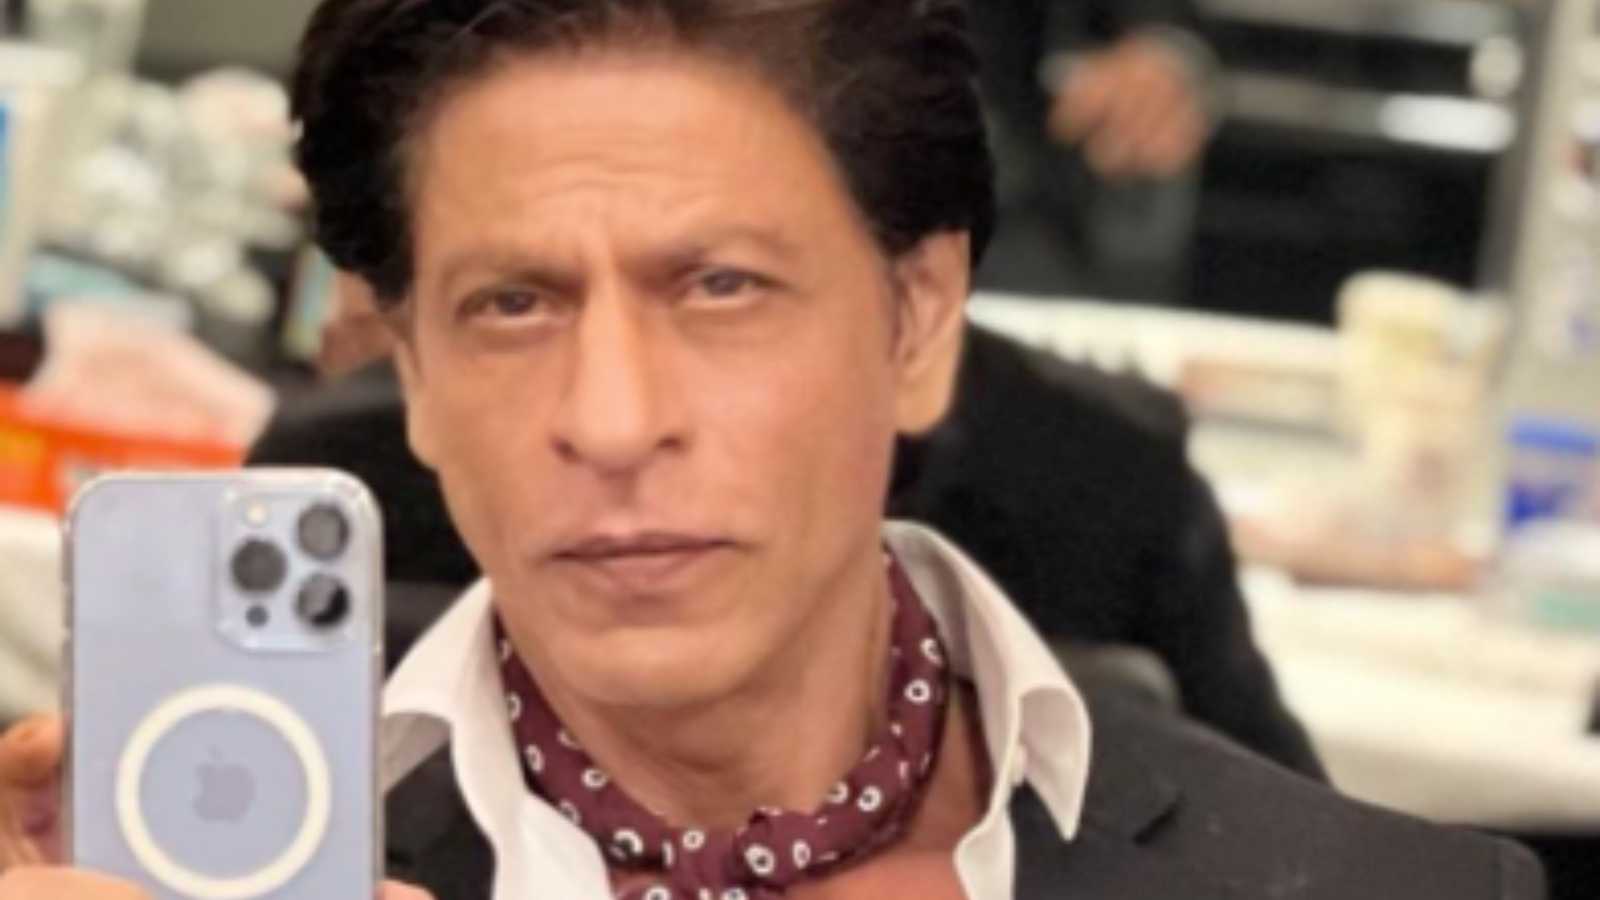 Shah Rukh Khan was bullied during the 80s and 90s